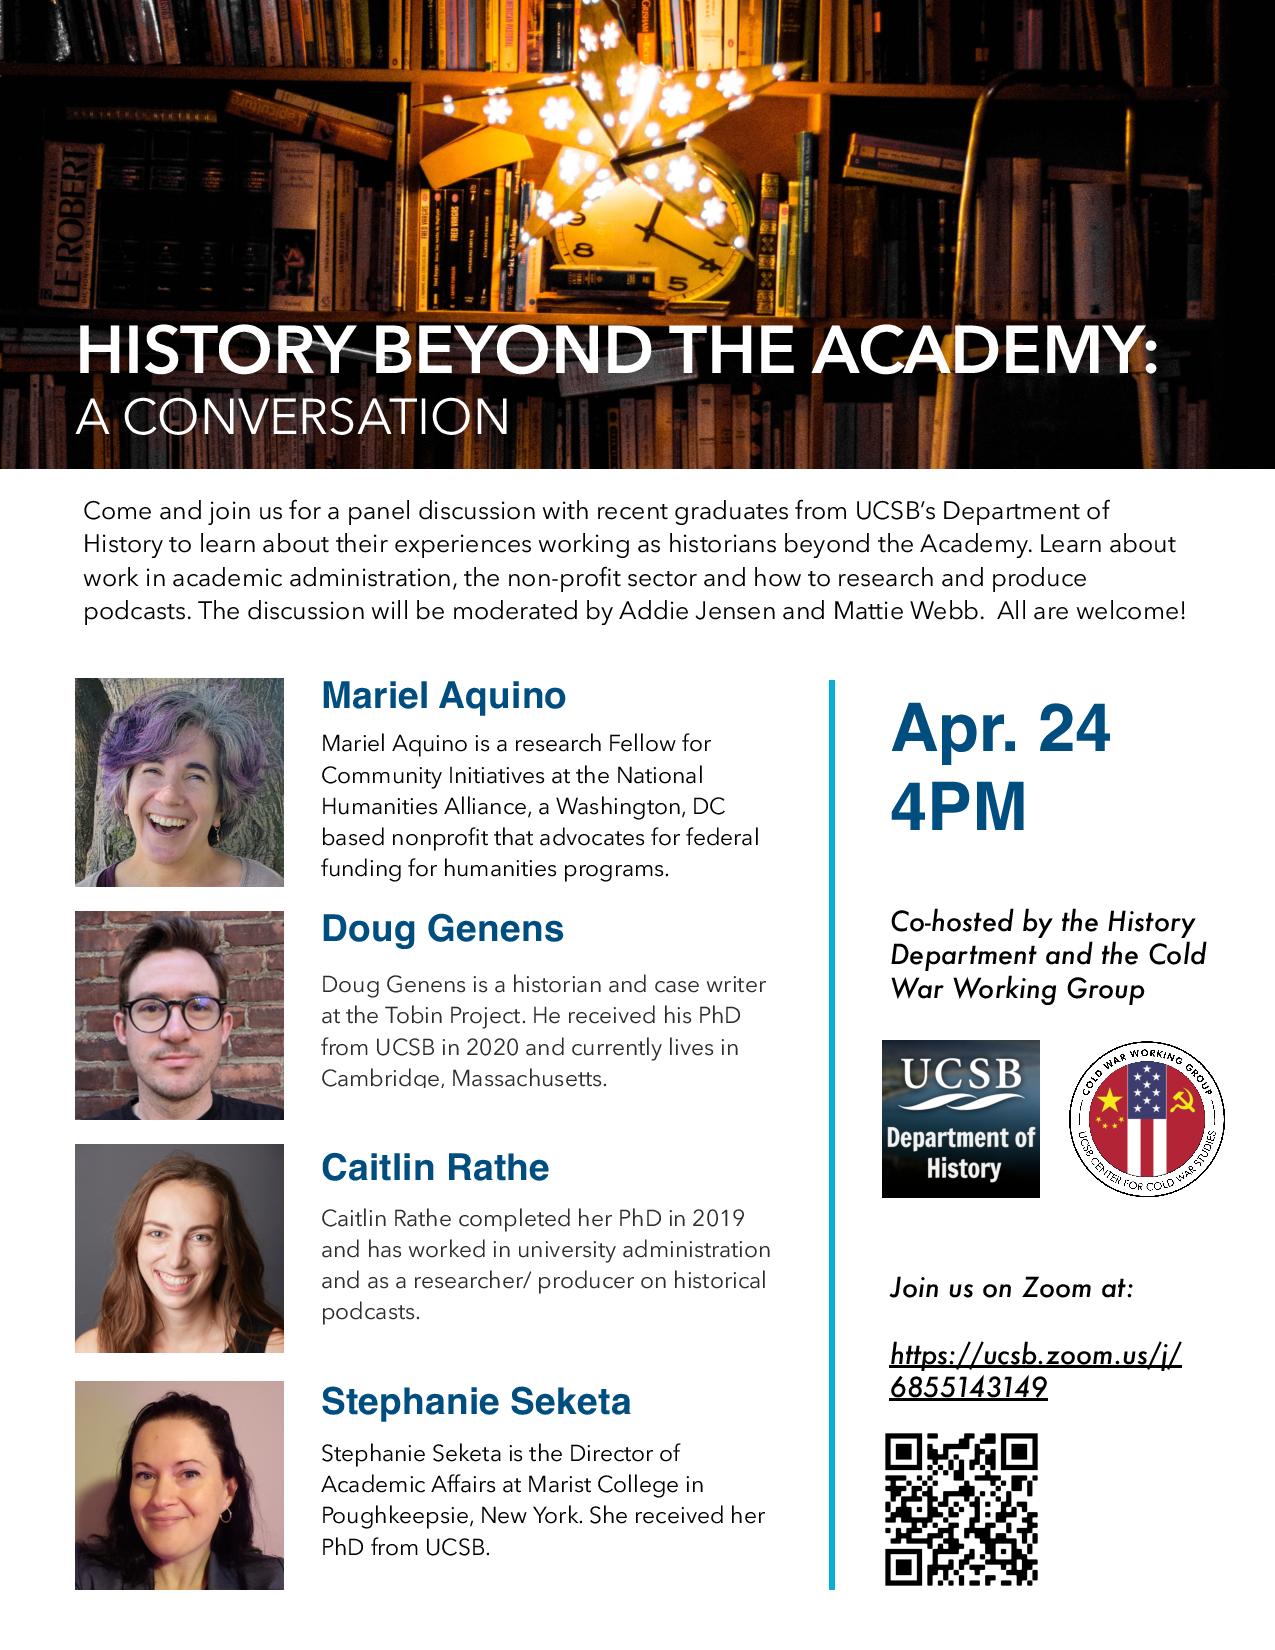 FLyer for Zoom talk for History Beyond the Academy: A Conversation on 4/24/21 at 4PM